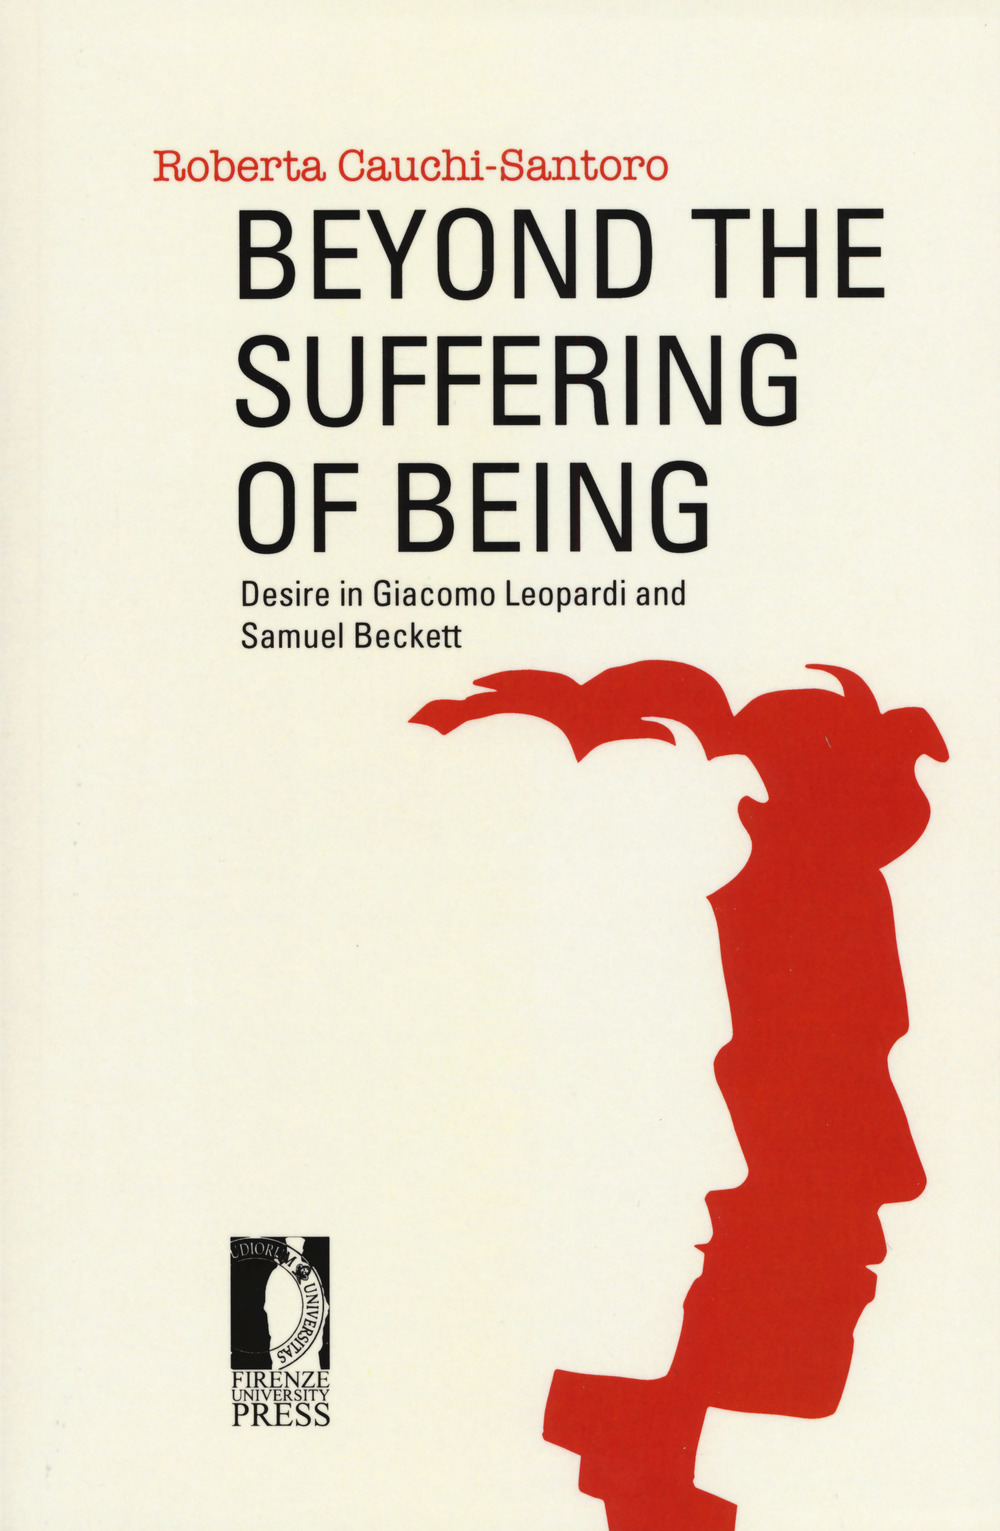 Beyond the suffering of being. Desire in Giacomo Leopardi and Samuel Beckett